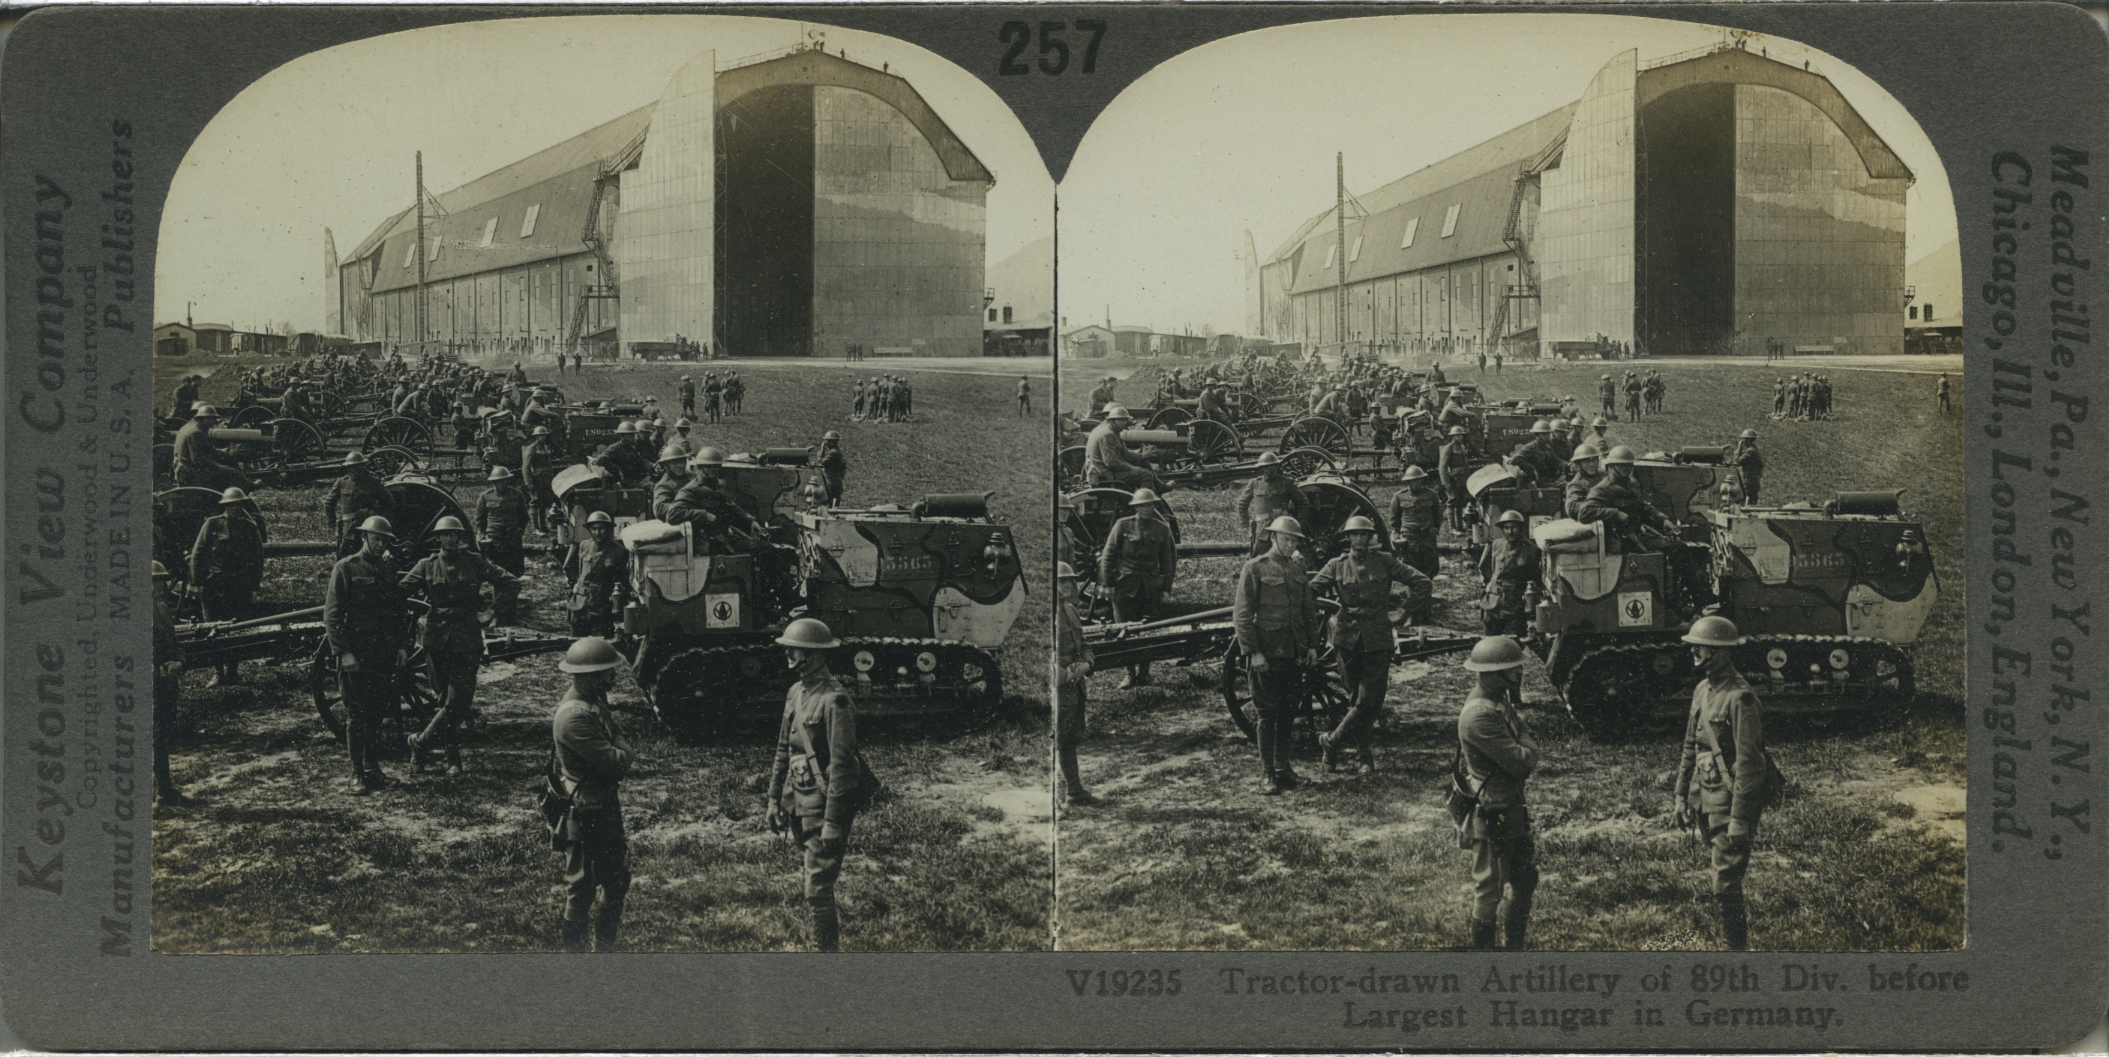 Tractor-drawn Artillery of 89th Div. Before Largest Hangar in Germany